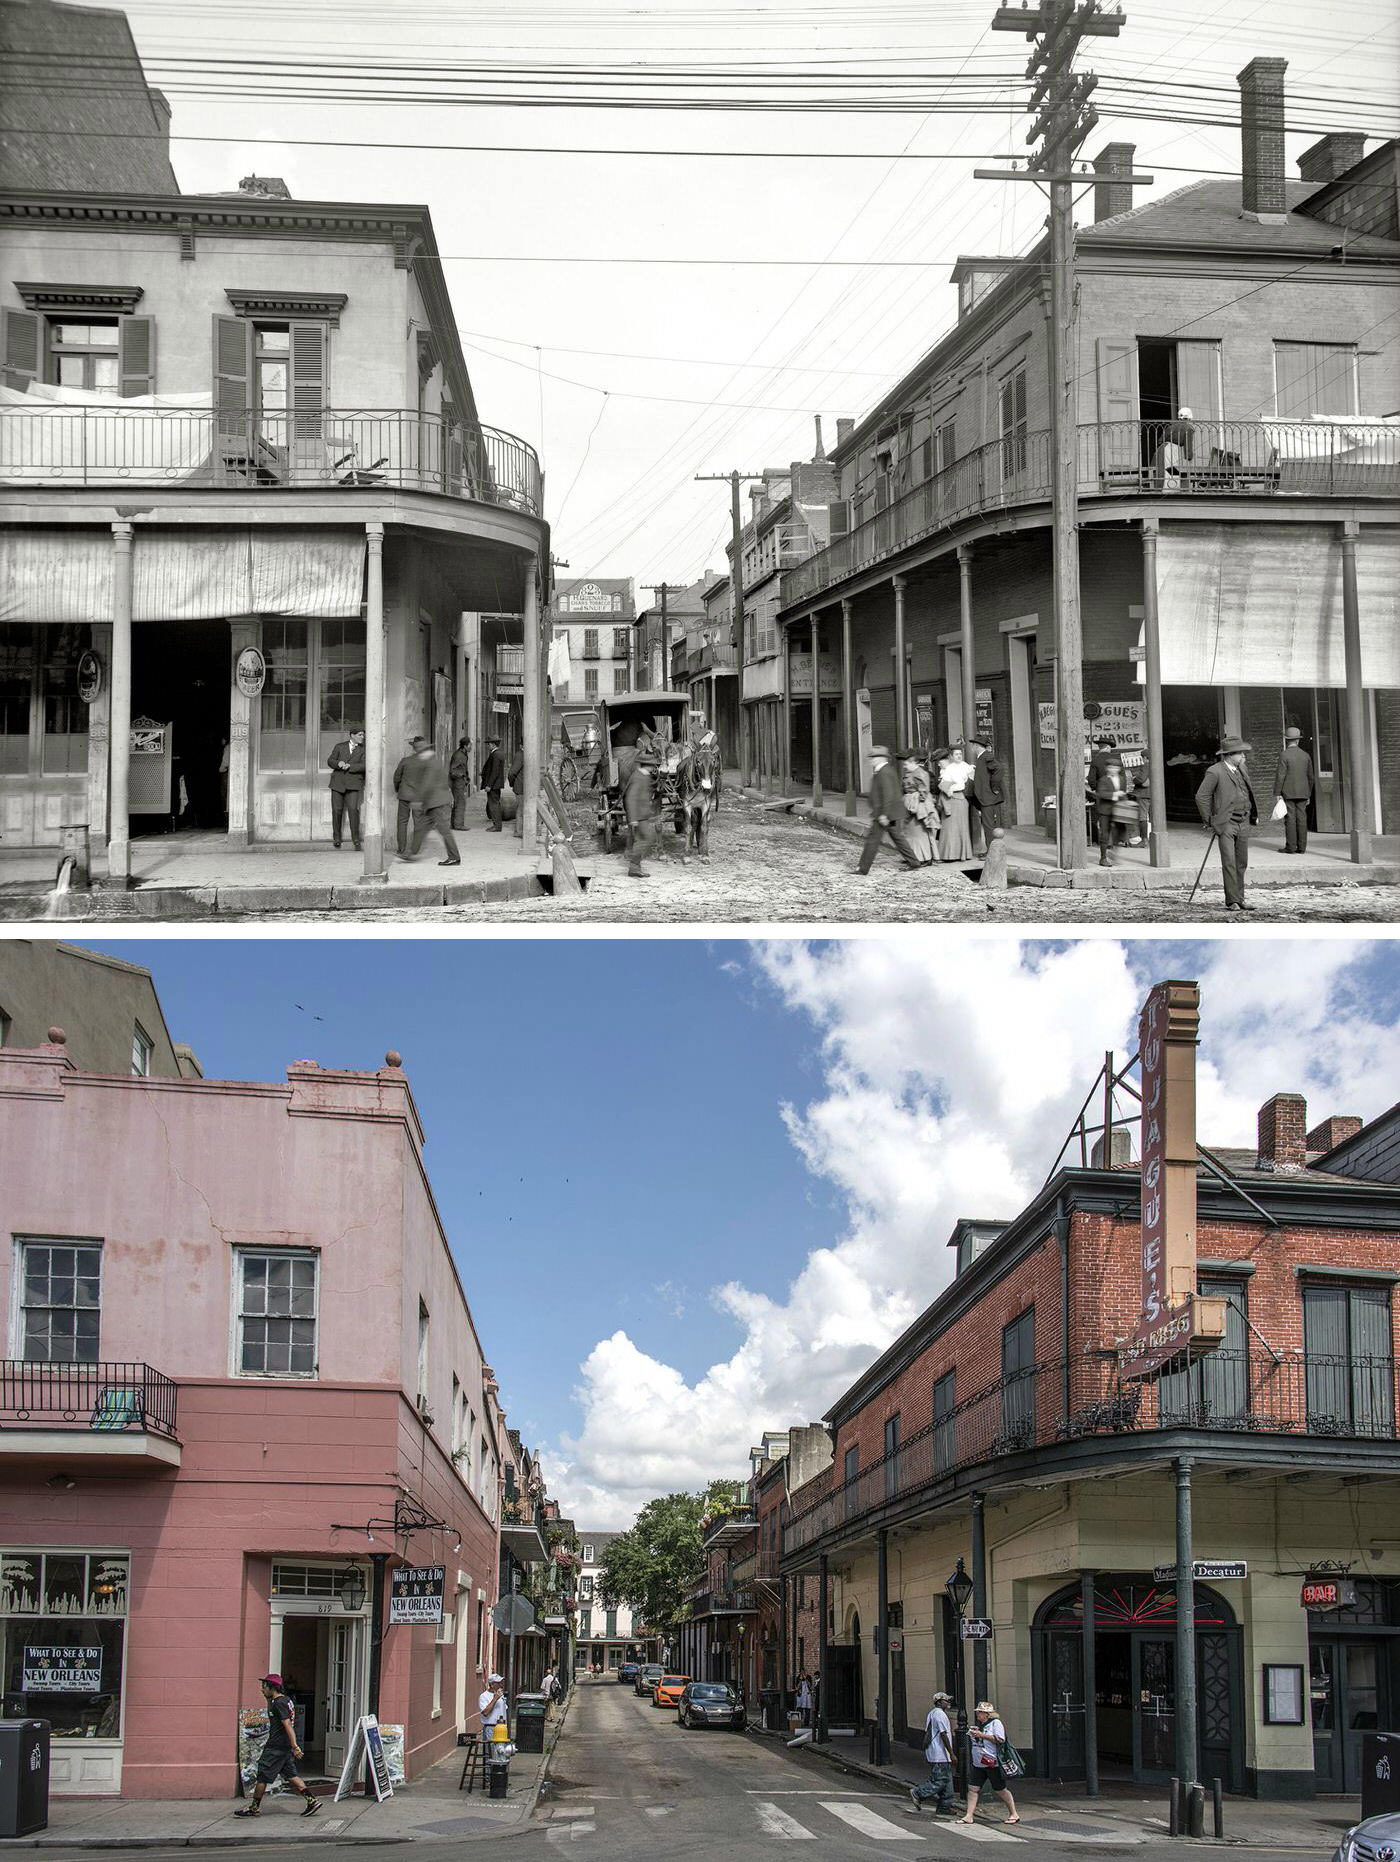 Decatur and Madison, 1906 VS Decatur and Madisonand, 2015